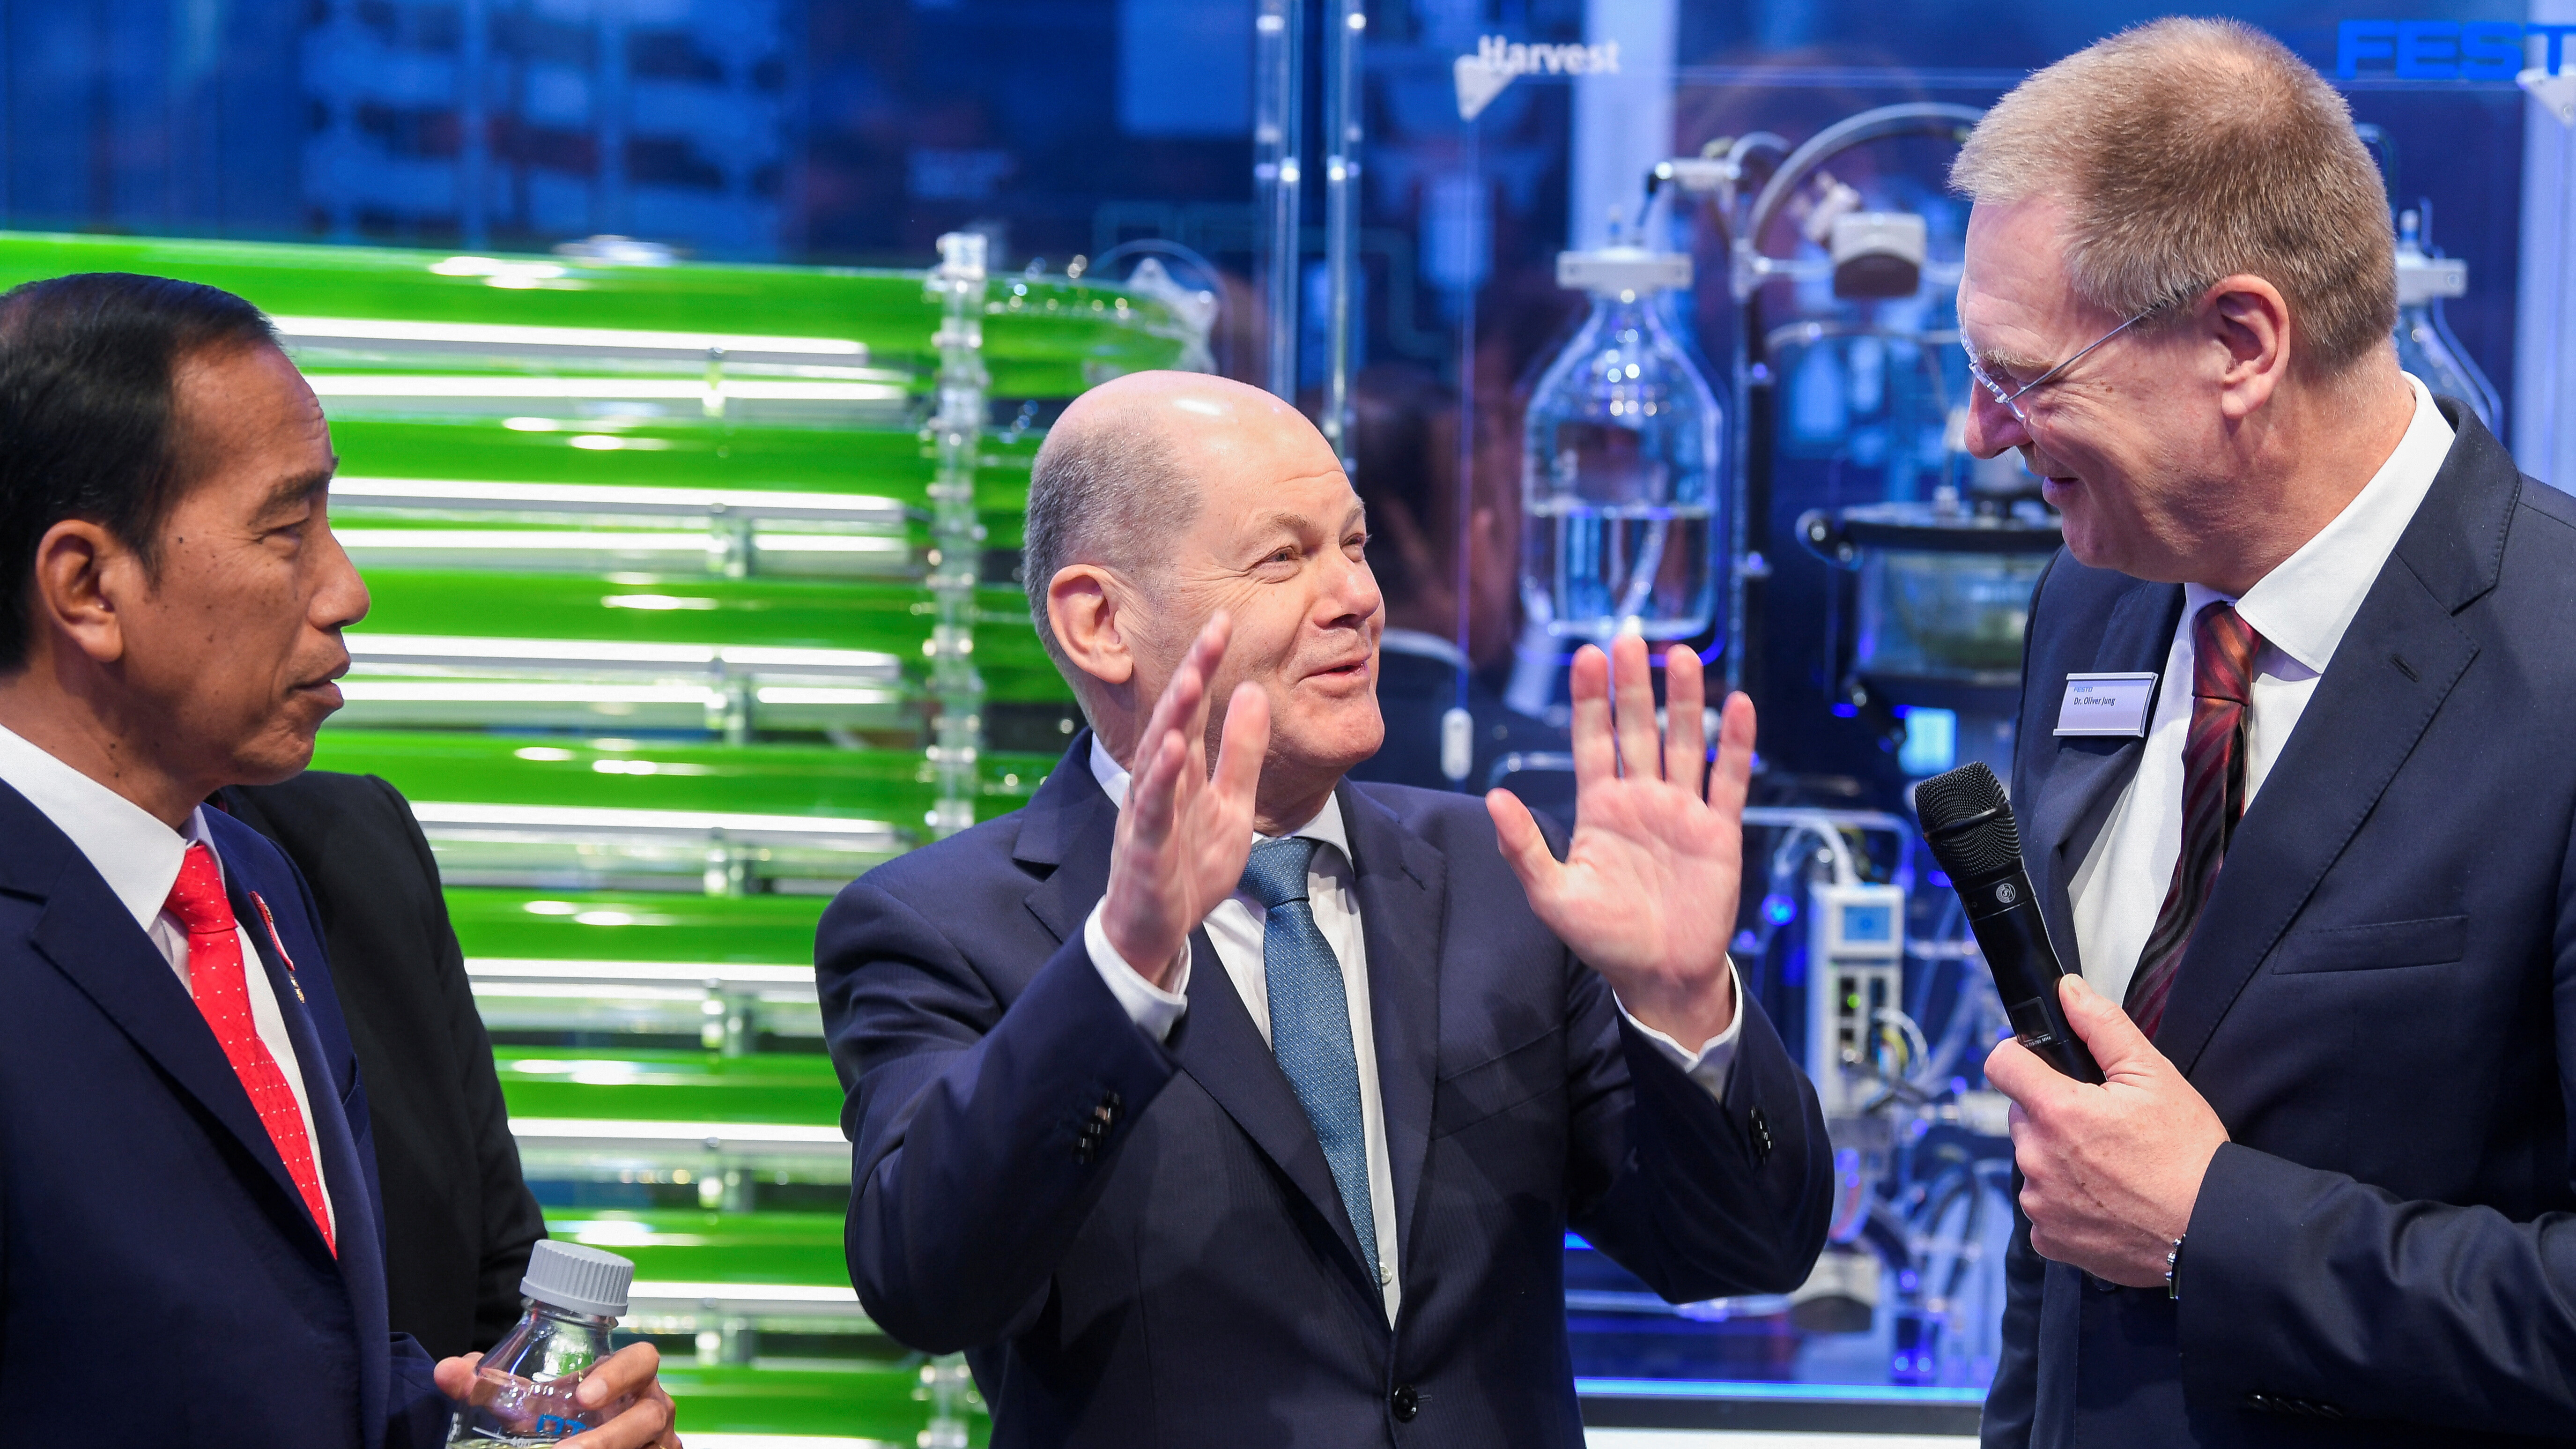 German Chancellor Olaf Scholz in Hannover where 300 companies from 25 countries are showing how hydrogen can power Germany's economy./ Fabian Bimmer/Reuters